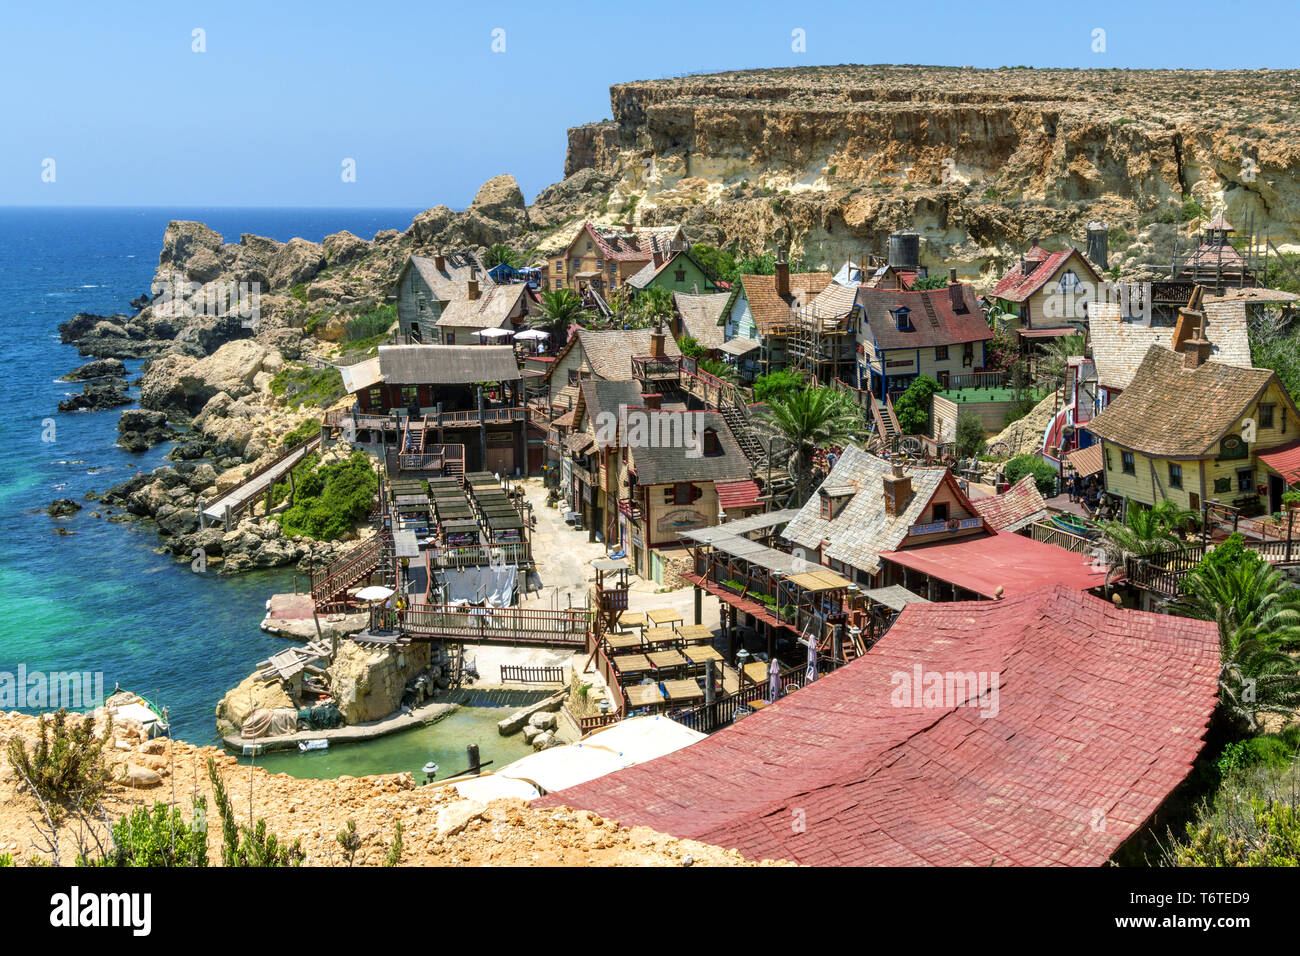 15 July 2018 - Anchor Bay, Malta. General view of the Popeye village, the preserved 1980 wooden filmset for the musical Popeye. Popular tourist attrac Stock Photo